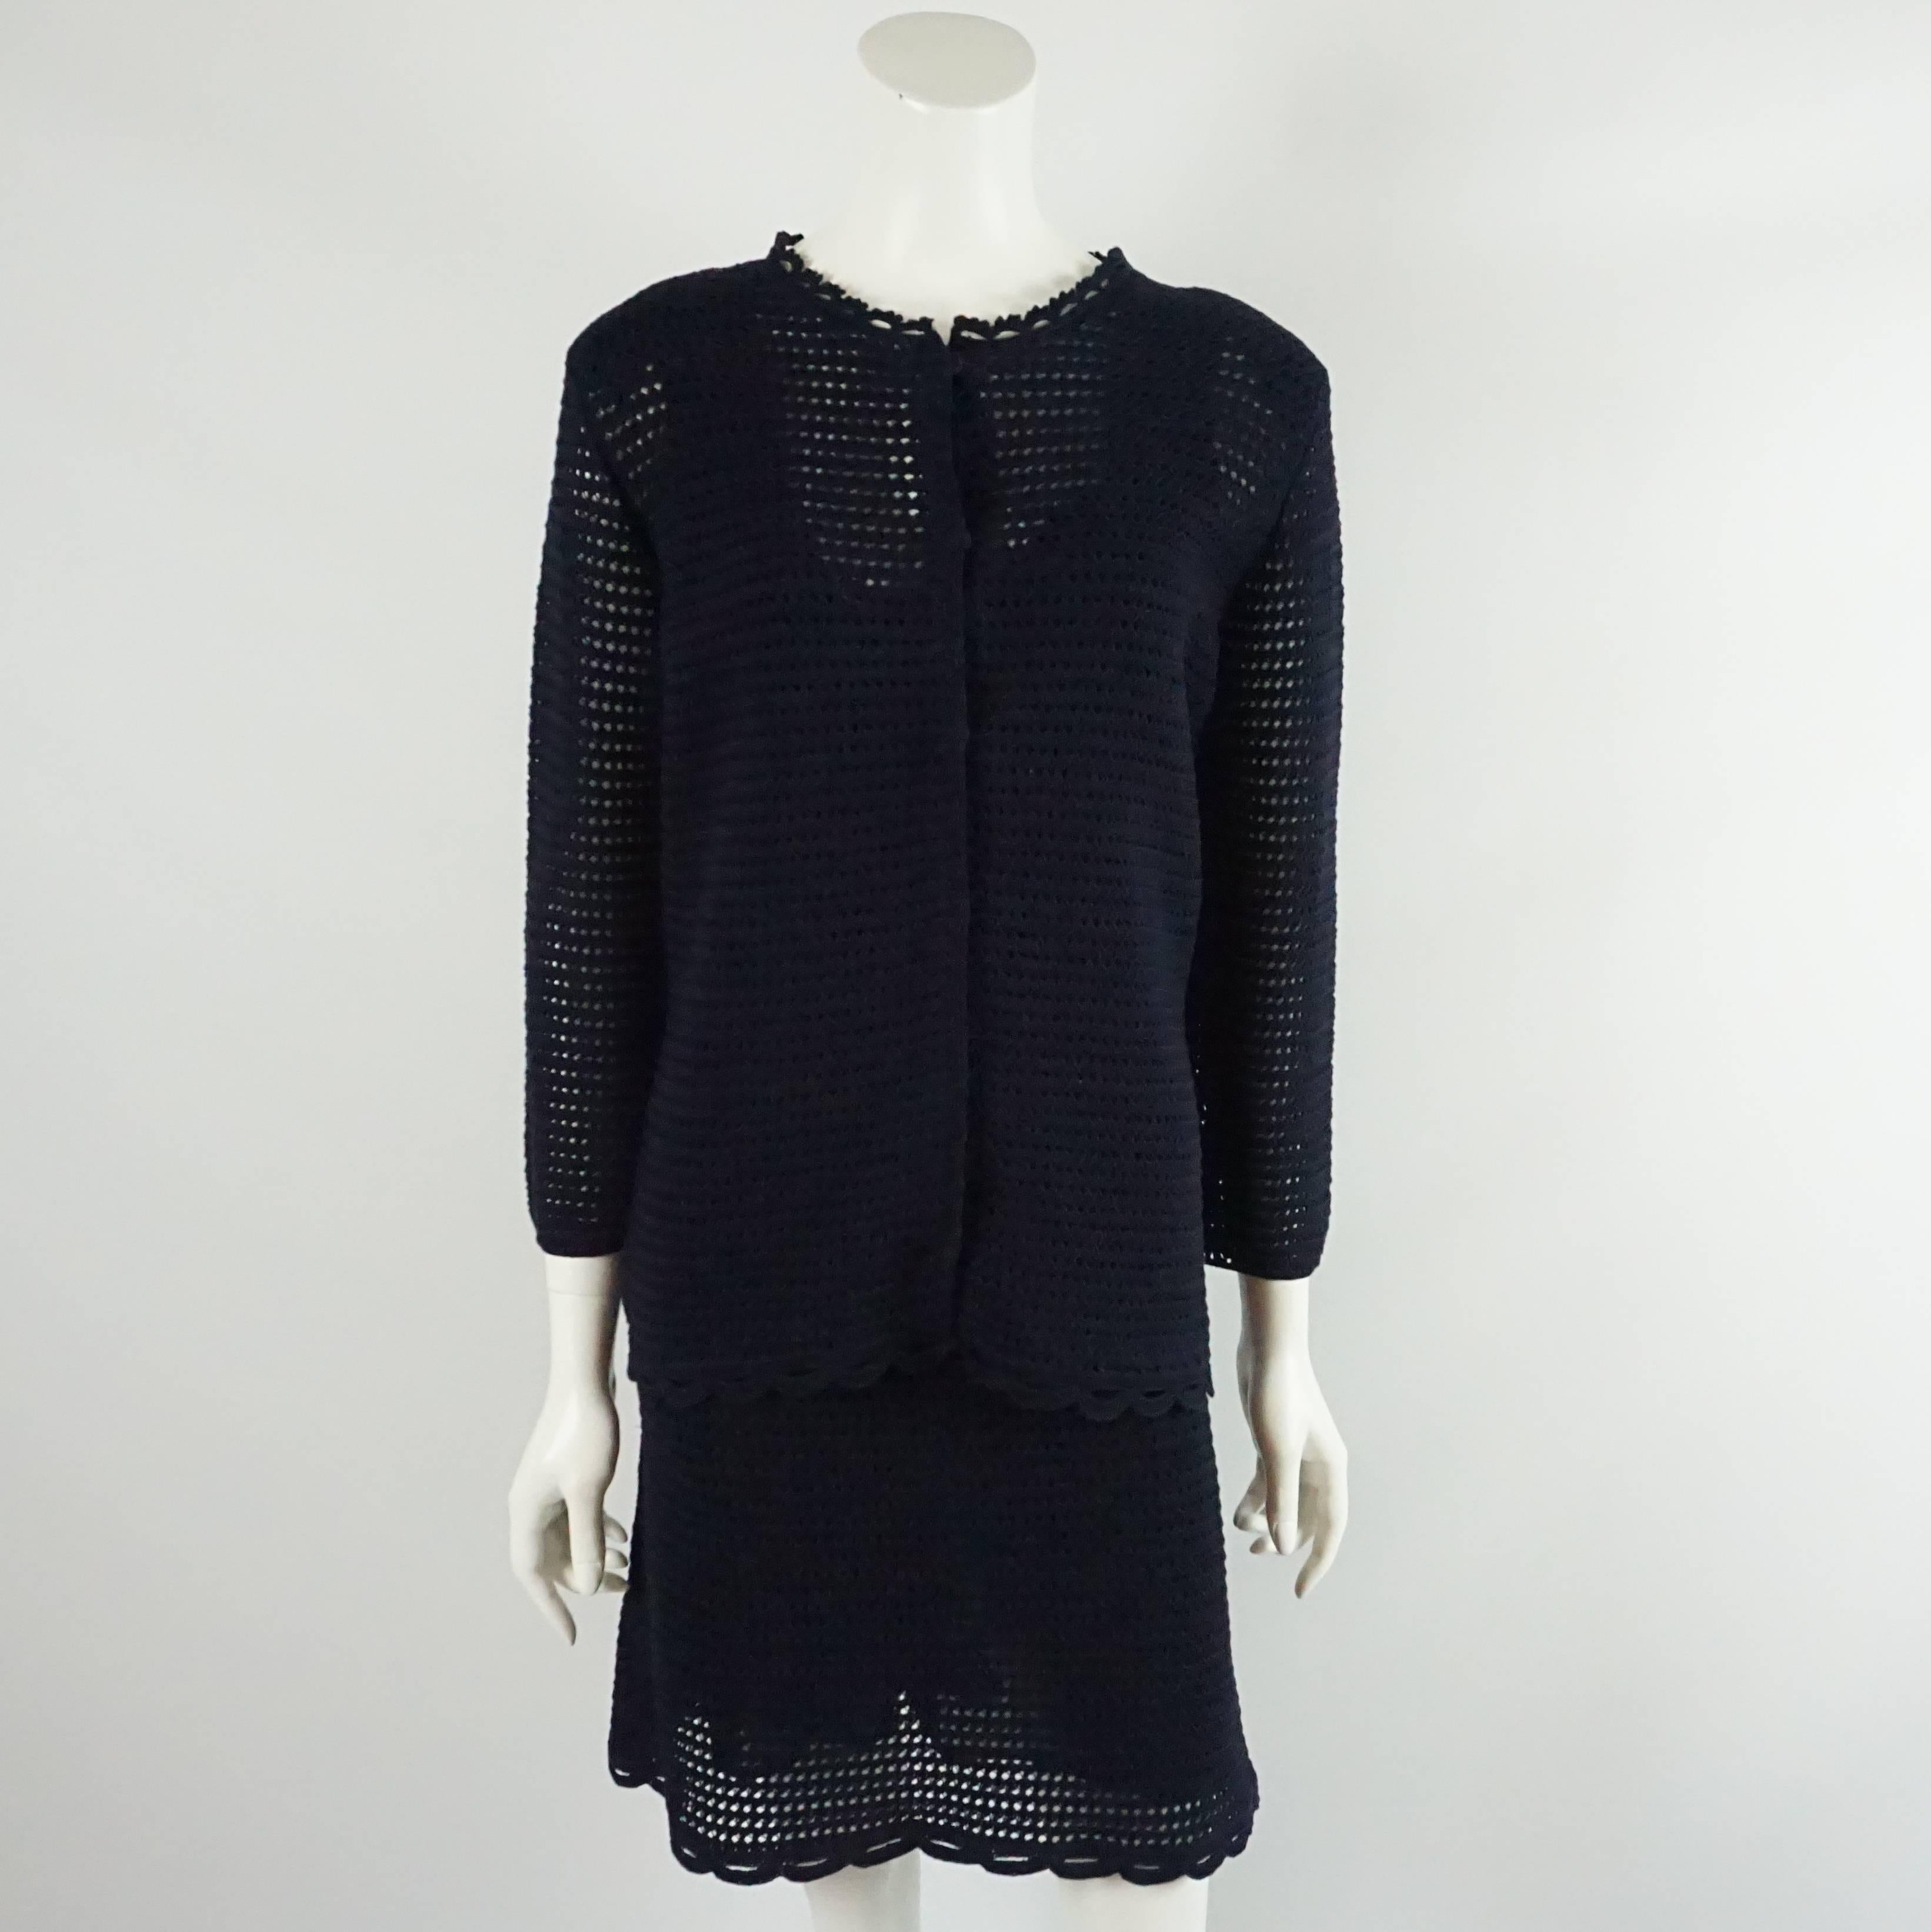 This navy Prada set comes with a thick crocheted dress and a matching long cardigan. The dress is sleeveless and comes with a black shell and both pieces have a scalloped trim. The set is in excellent condition.

Measurements

Dress
Bust: